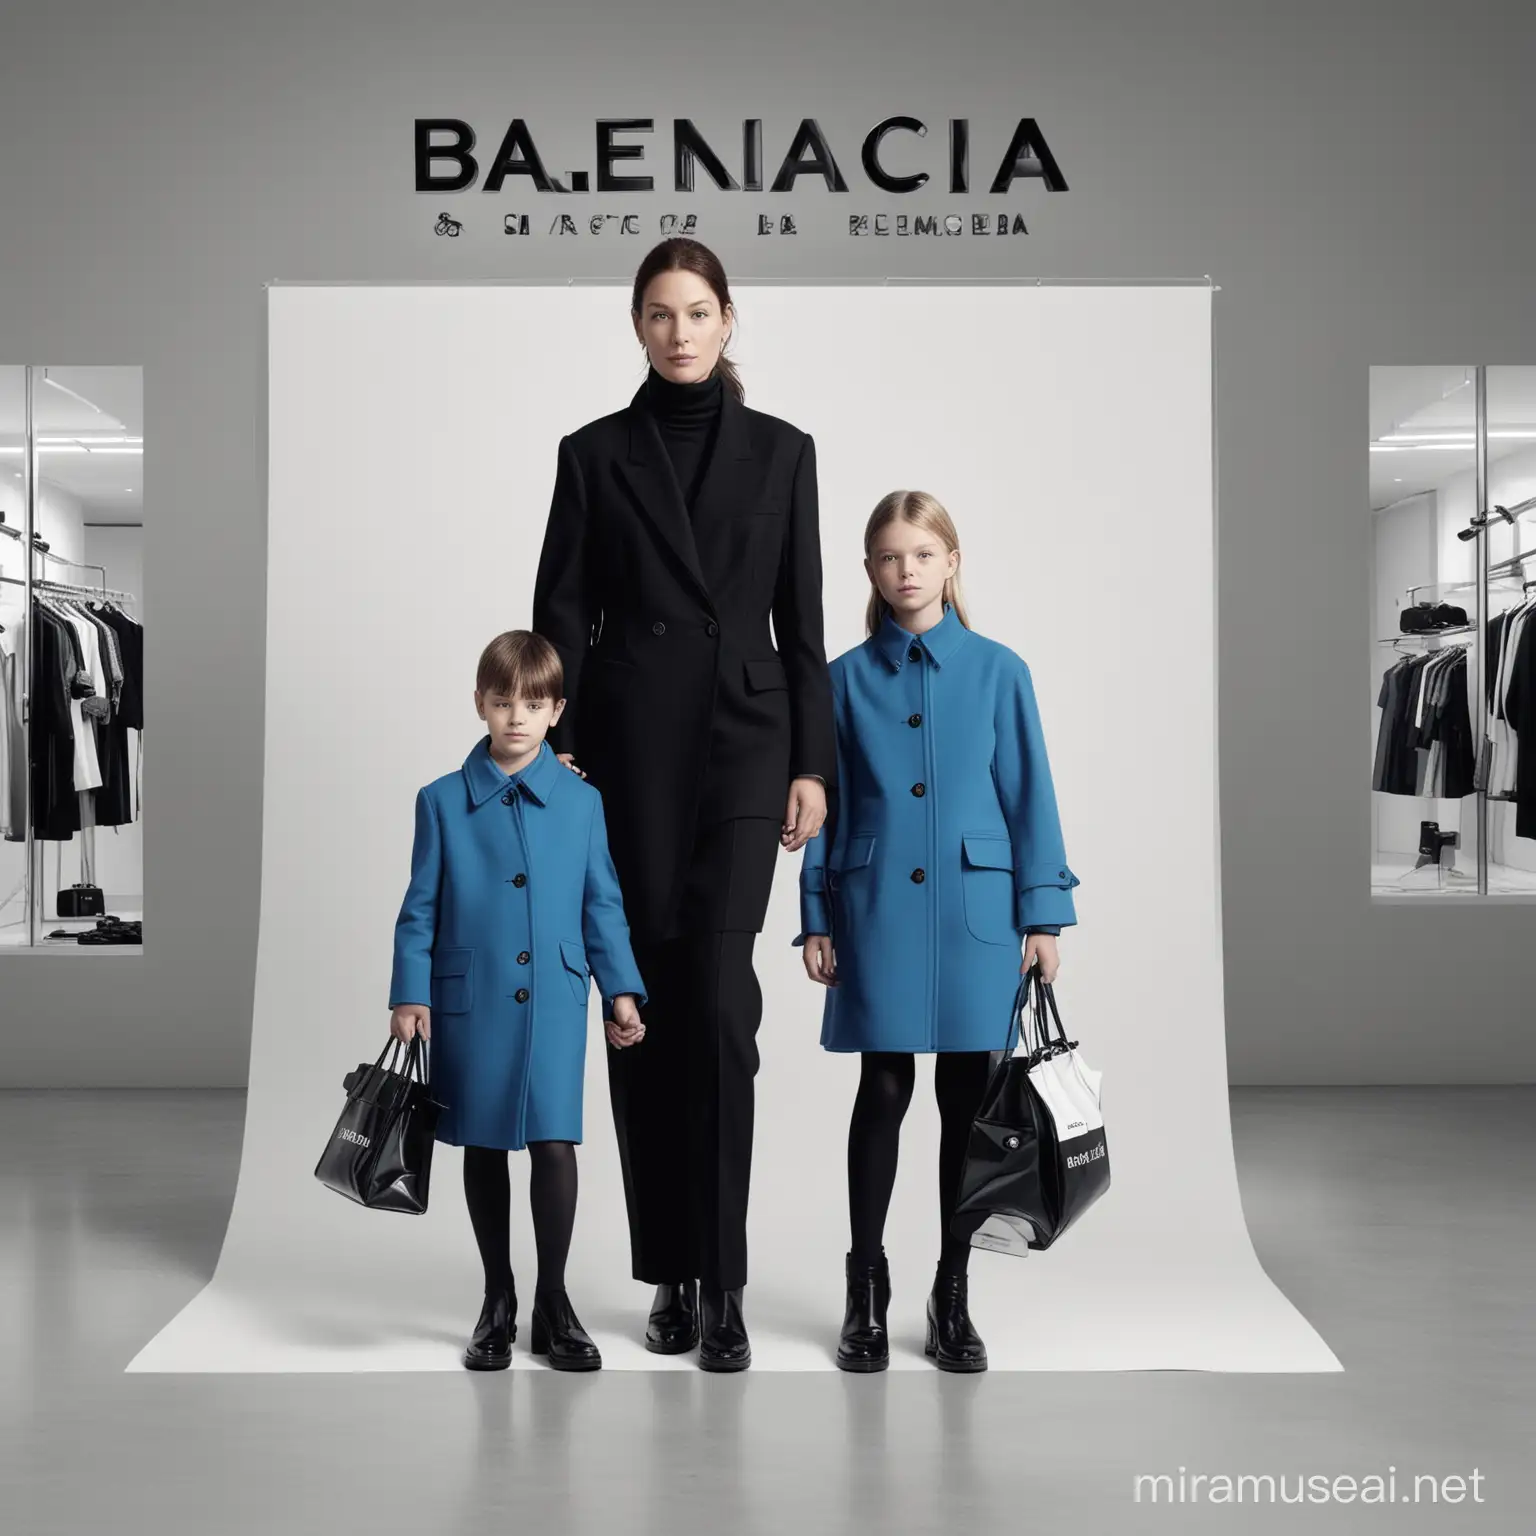 Design an in-store advertising poster for the Balenciaga Family campaign. Showcase celebrity parents and their children wearing Balenciaga outfits, with the message 'Together for a Serene Future.' Incorporate the logos of Balenciaga and UNICEF to emphasize the partnership. Convey the brand's elegance, warmth, and philanthropic commitment, creating an inviting atmosphere for shoppers.